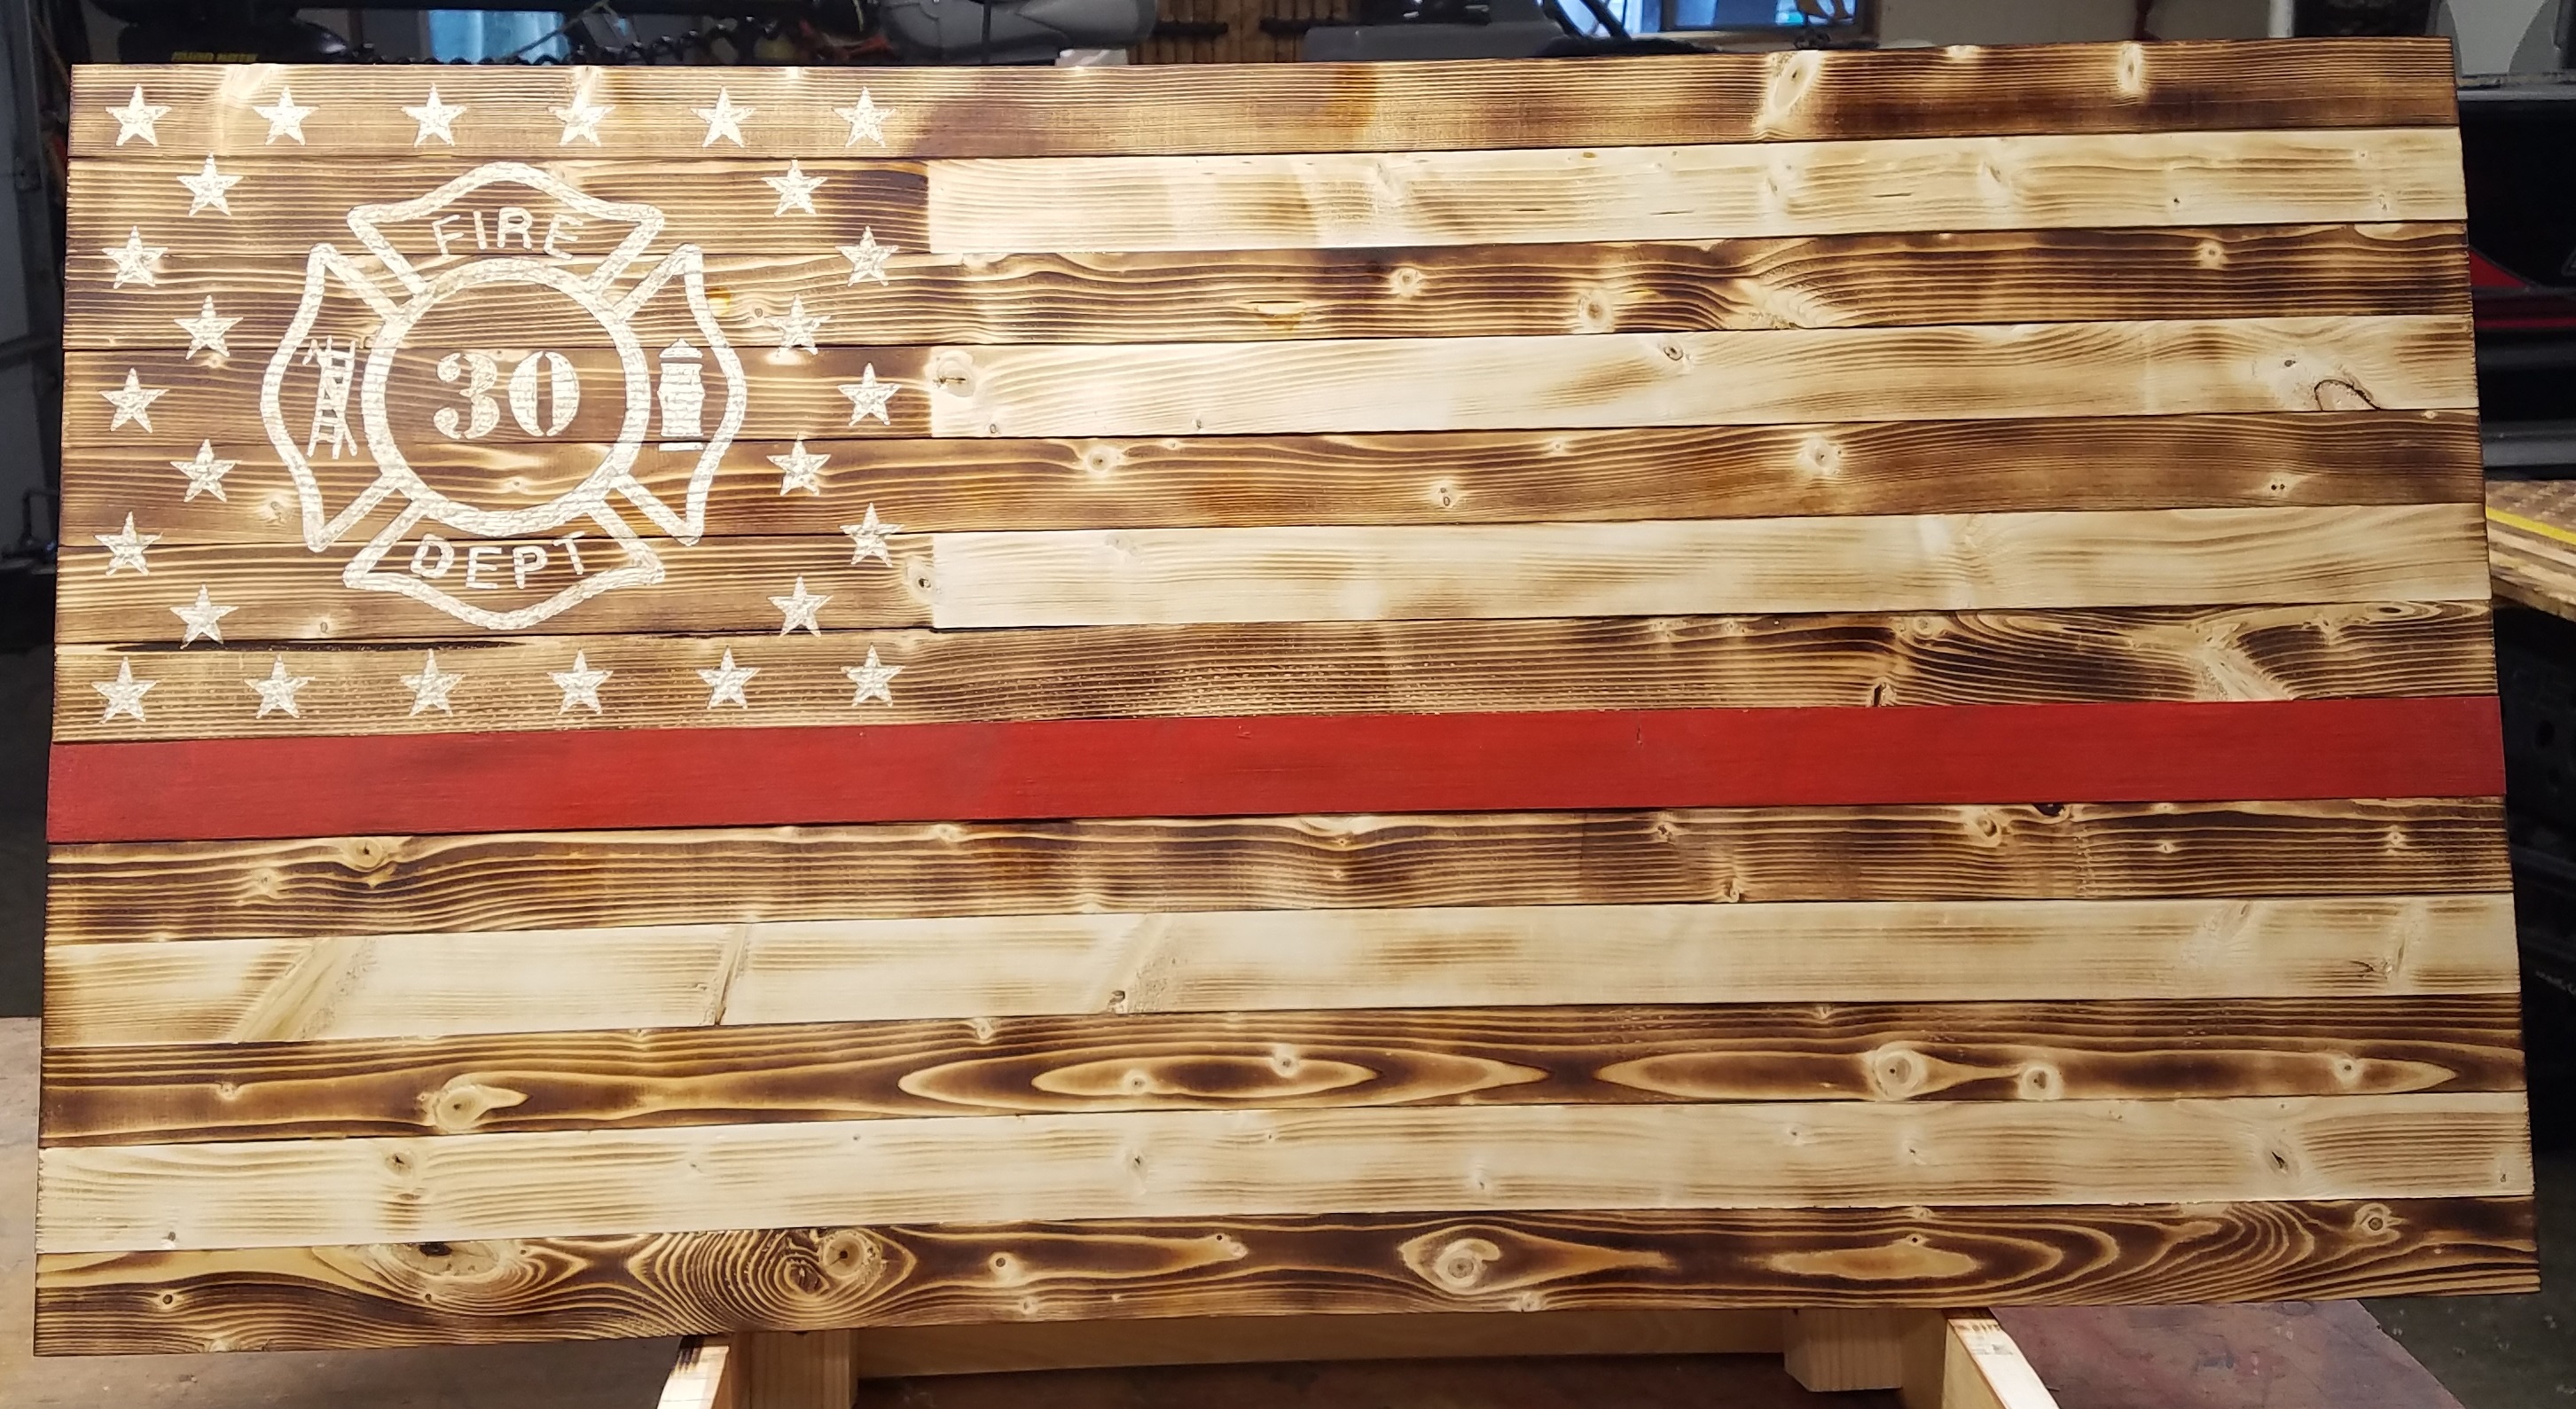 Picture of rustic fire fighter flag with thin red line painted across the middle. Located around the stars of the flag is the fire fighter symbol with customized fire figher number.